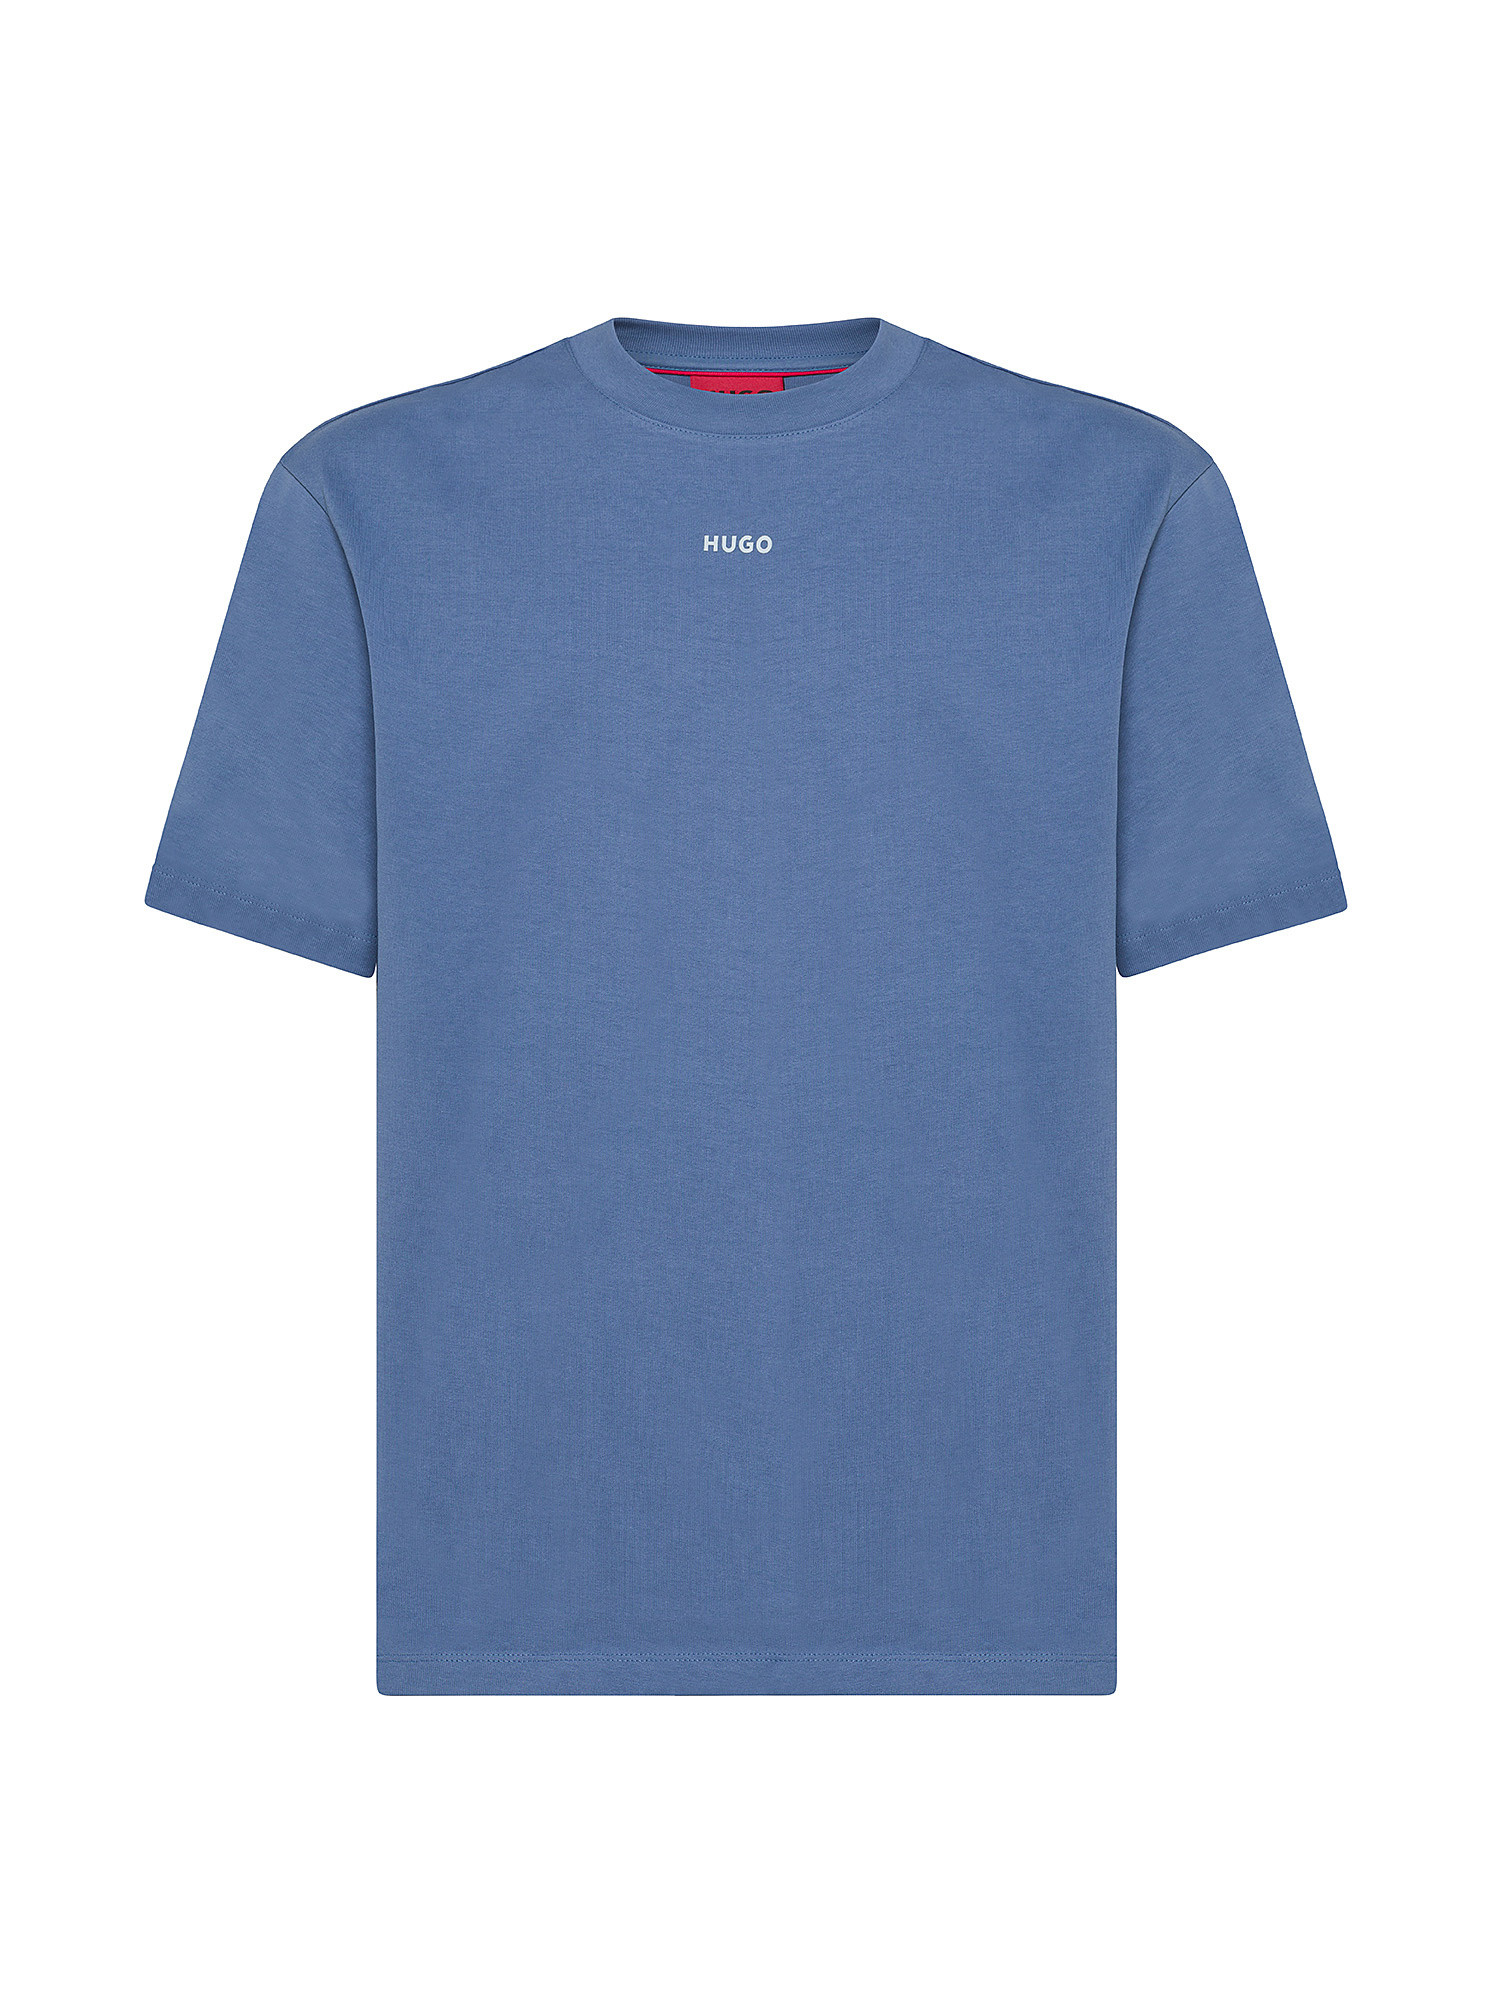 Hugo - T-shirt con stampa logo in cotone, Azzurro, large image number 0